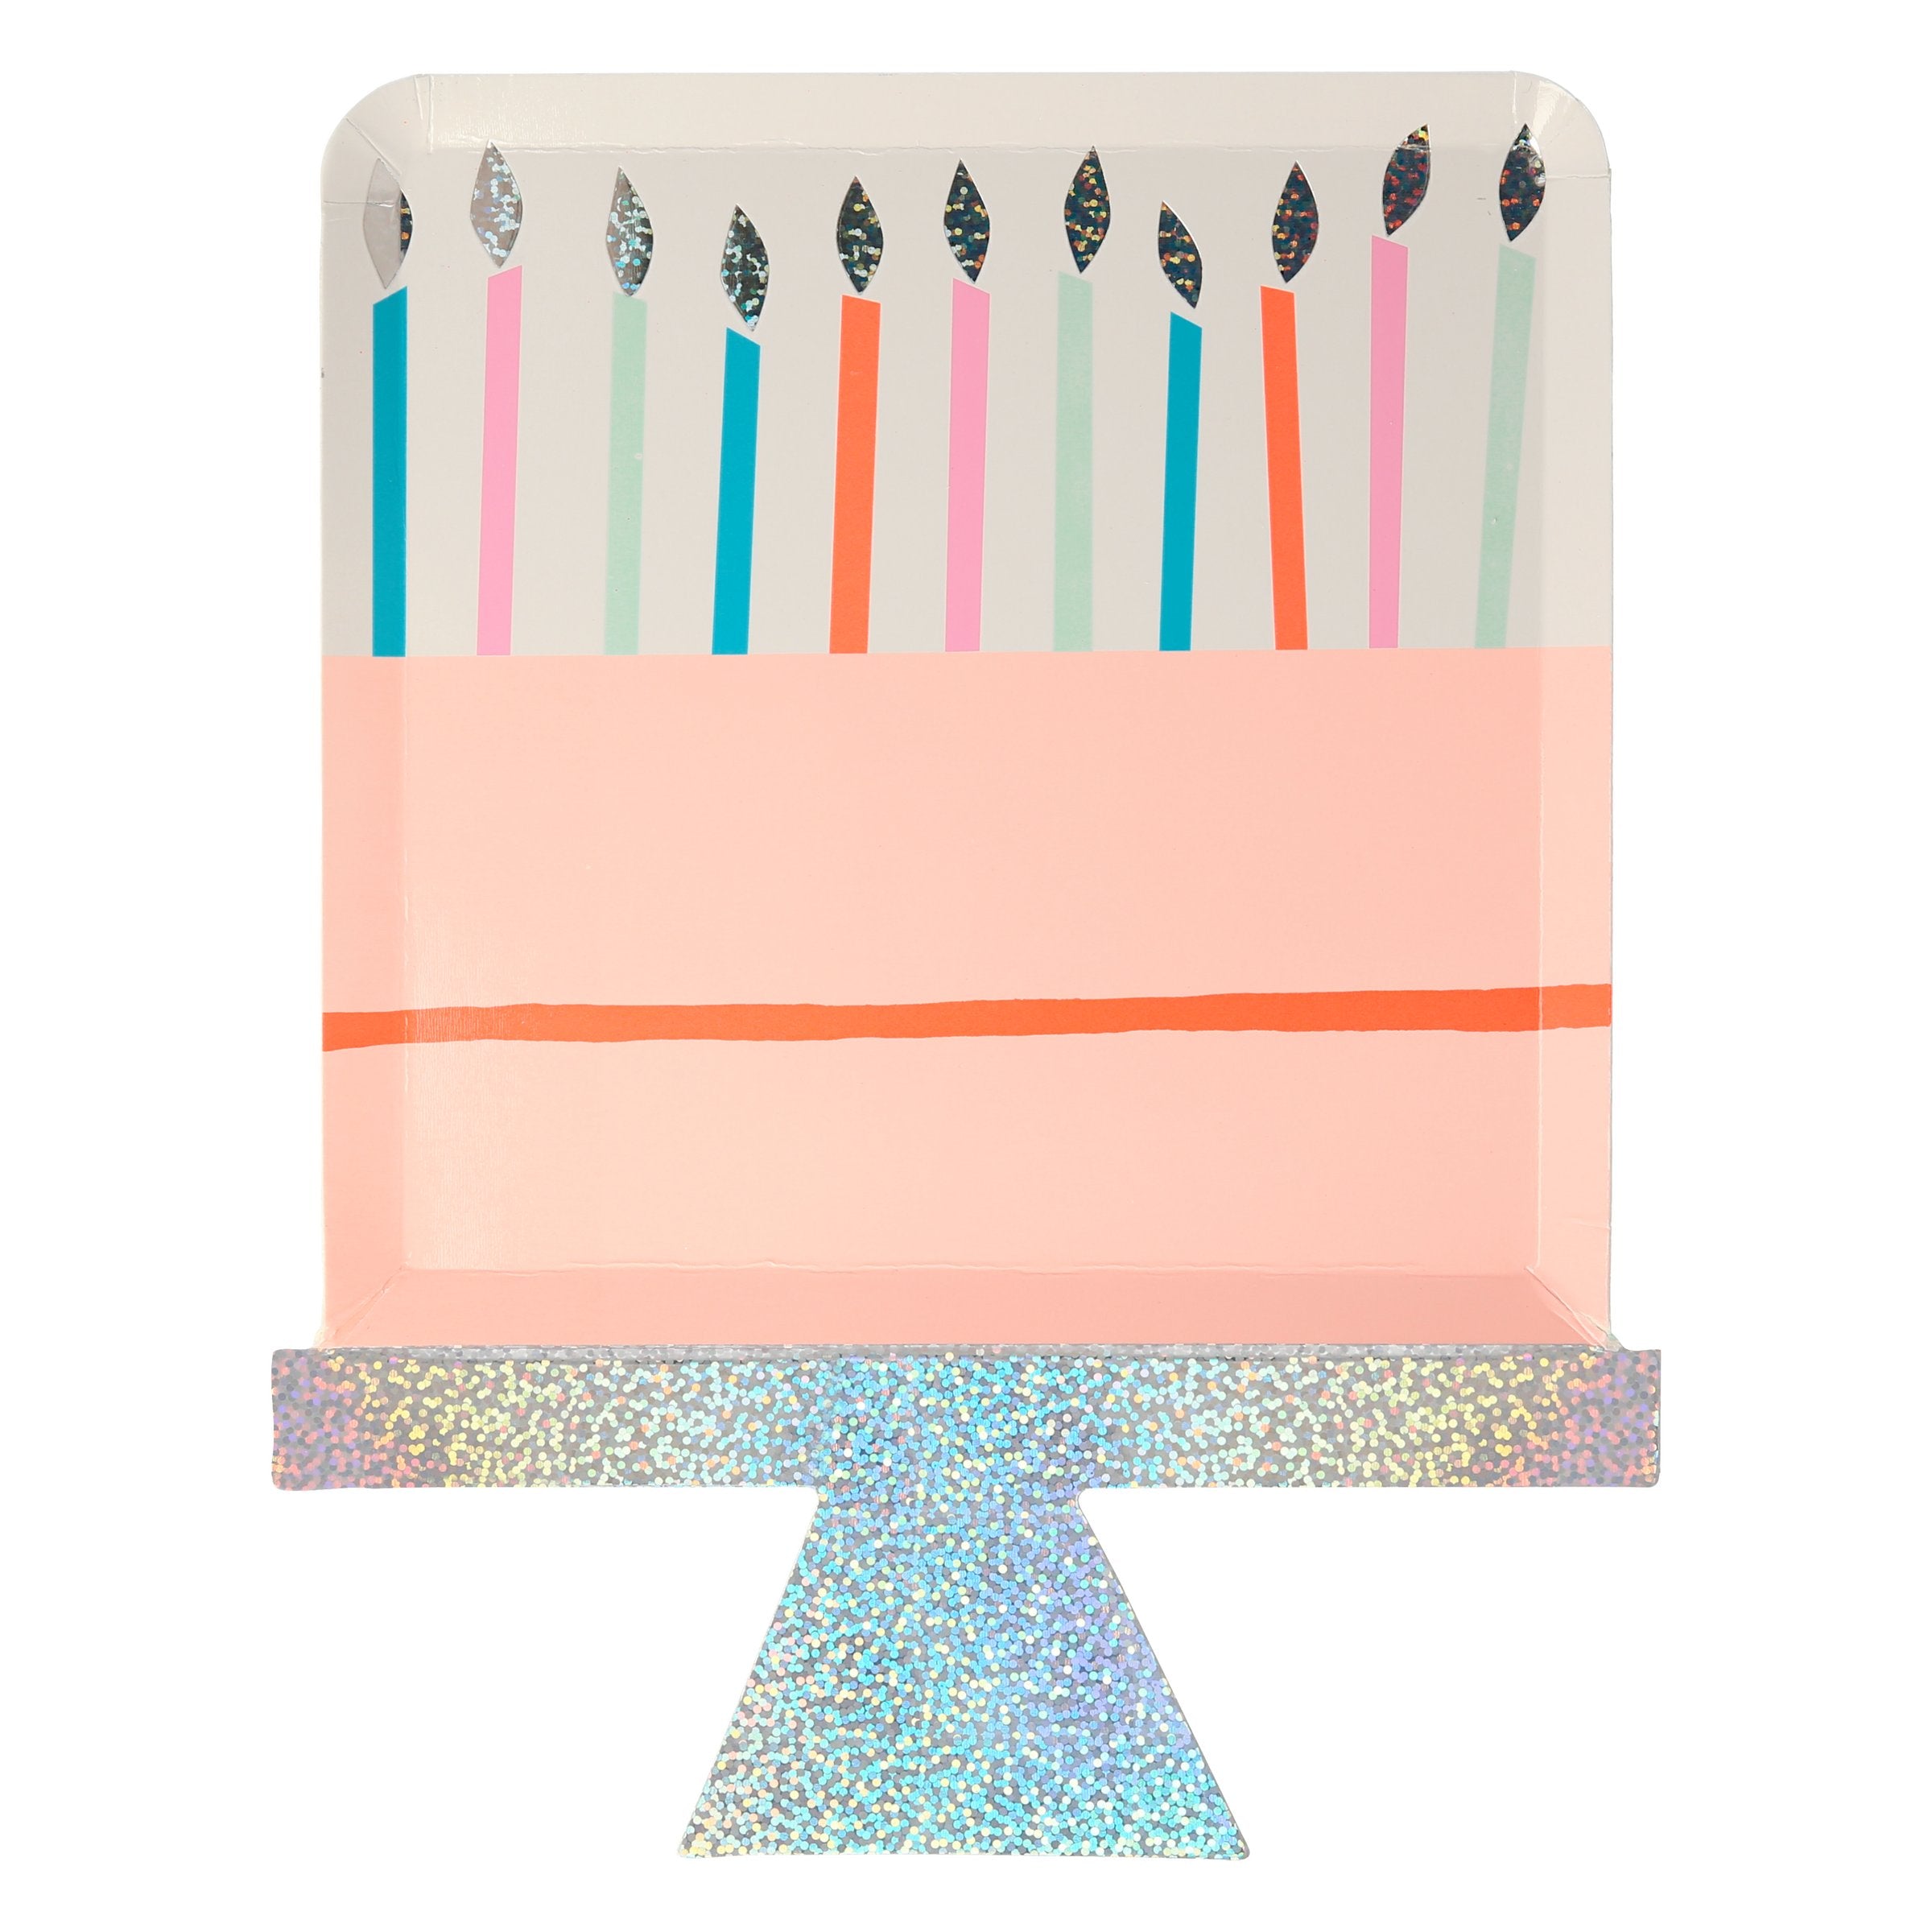 These fabulous paper plates are in the shape of a birthday cake with candles.